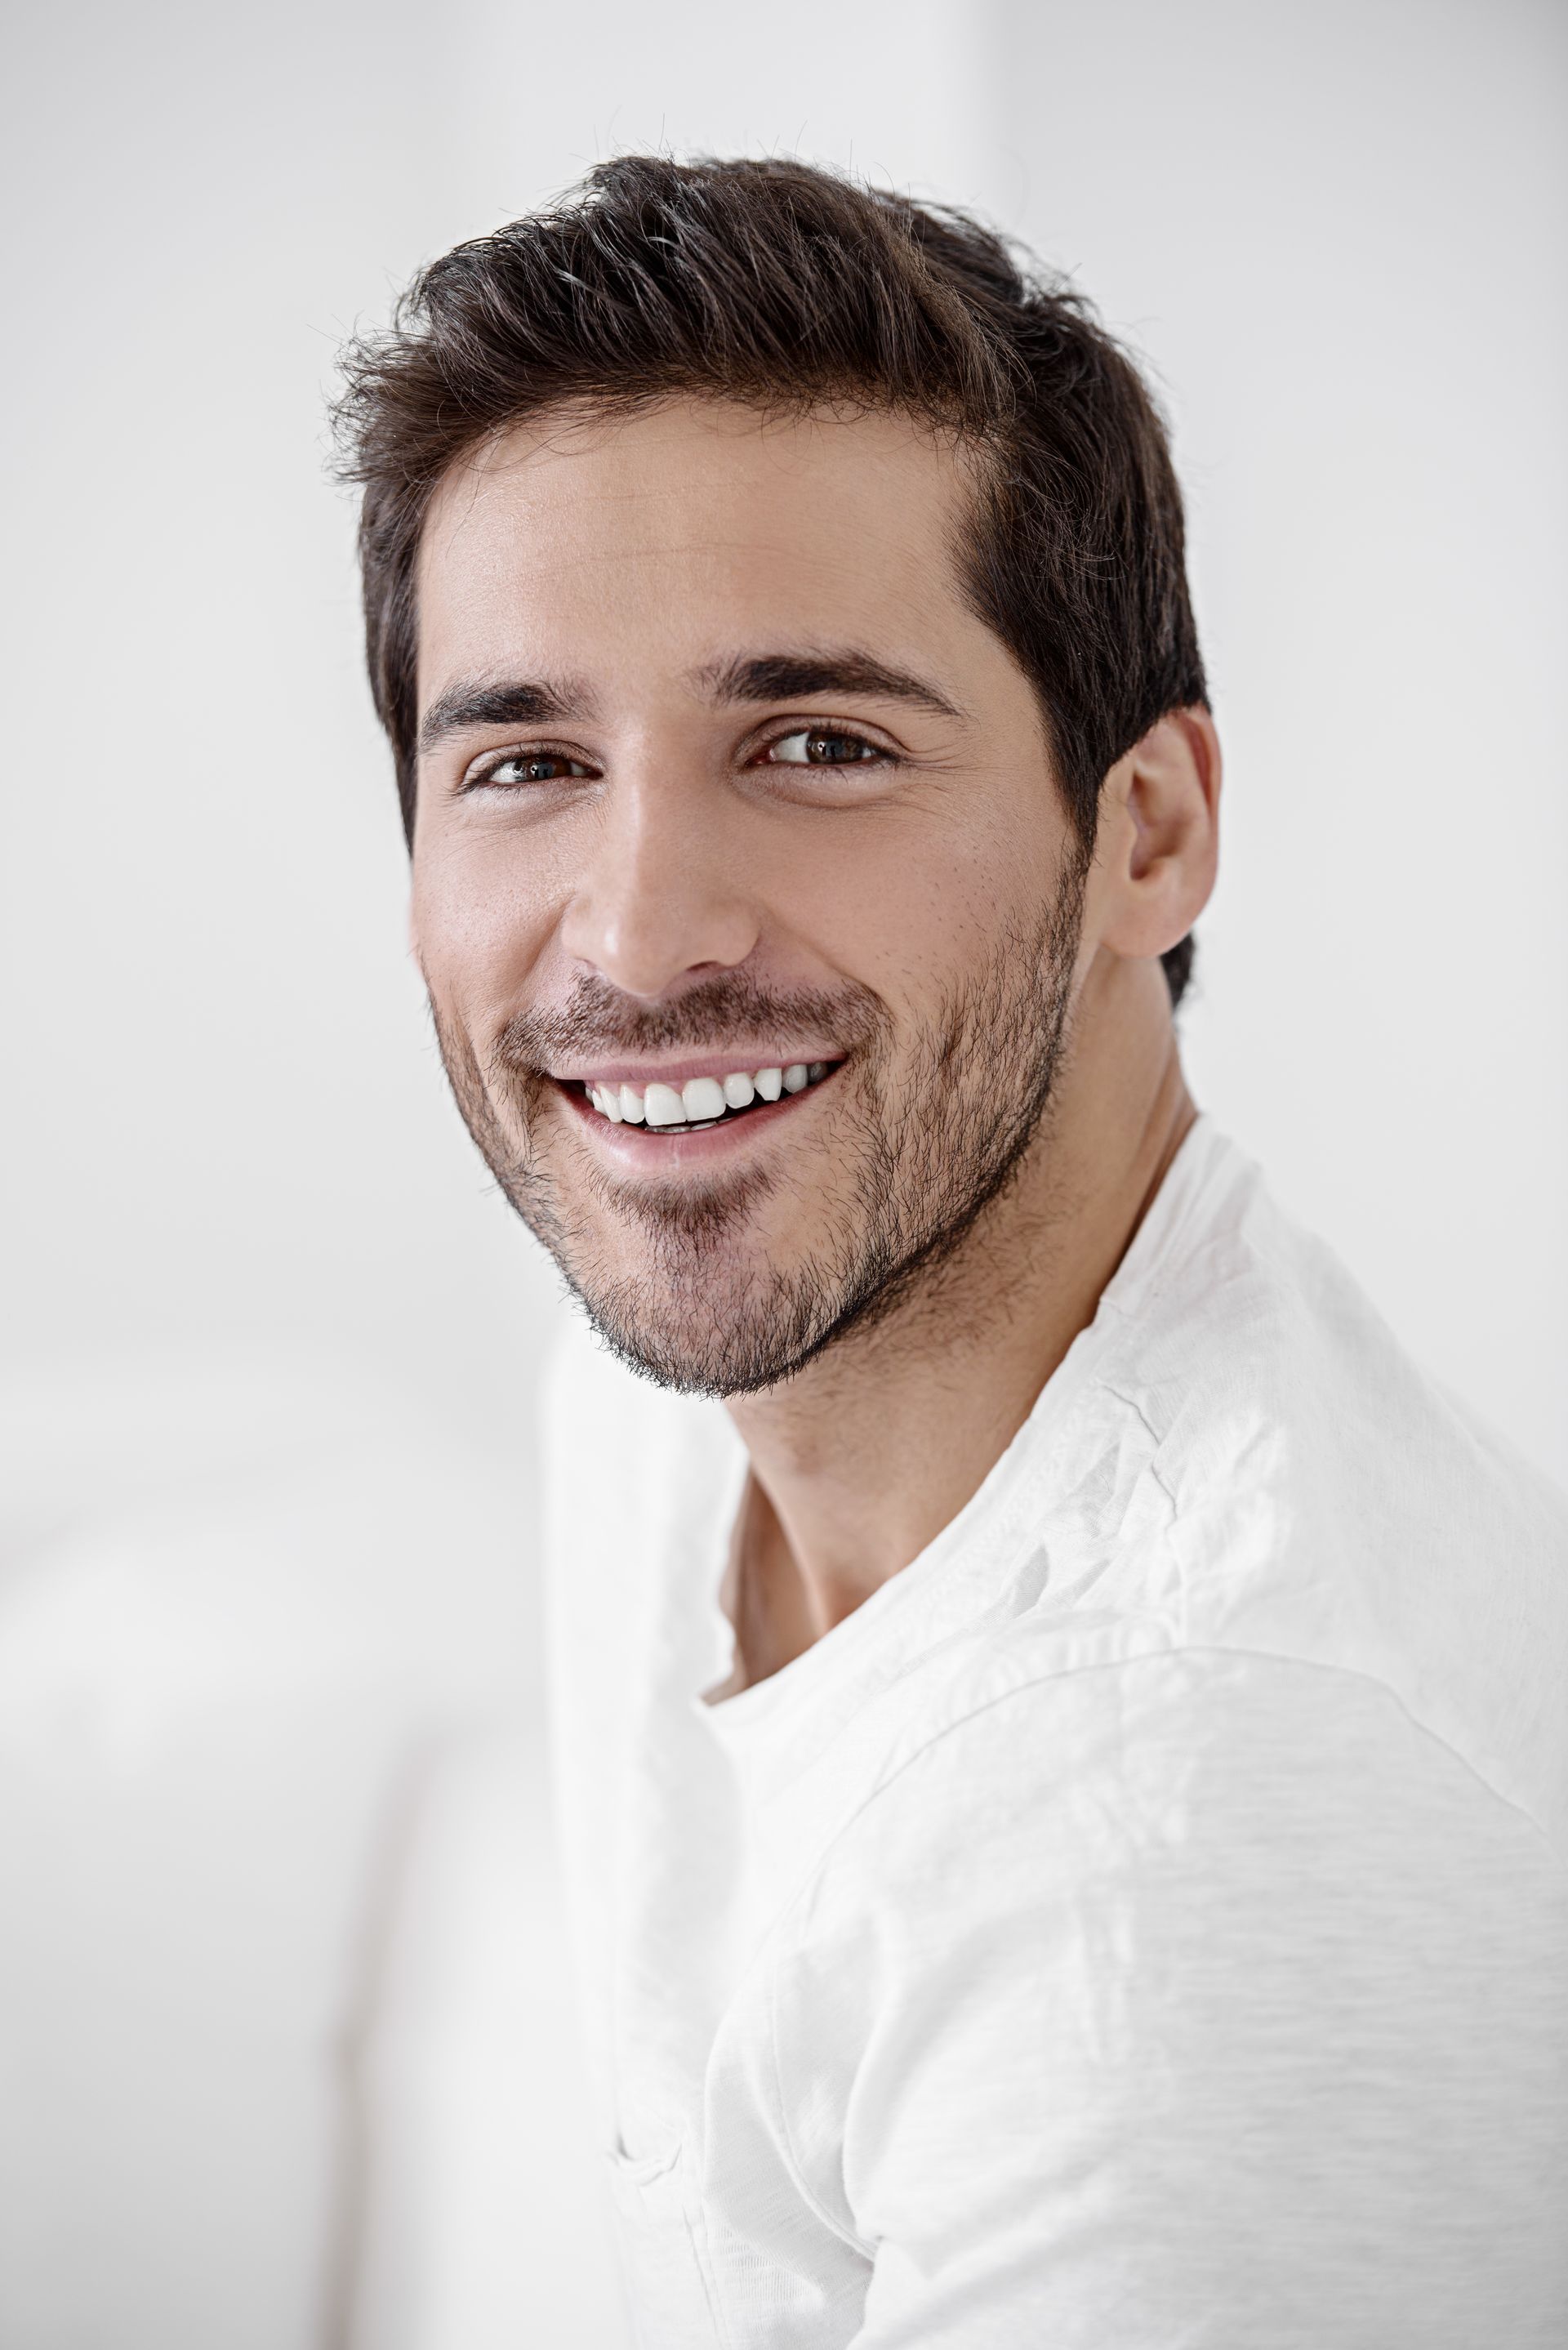 a man with a beard is smiling for the camera while wearing a white shirt .